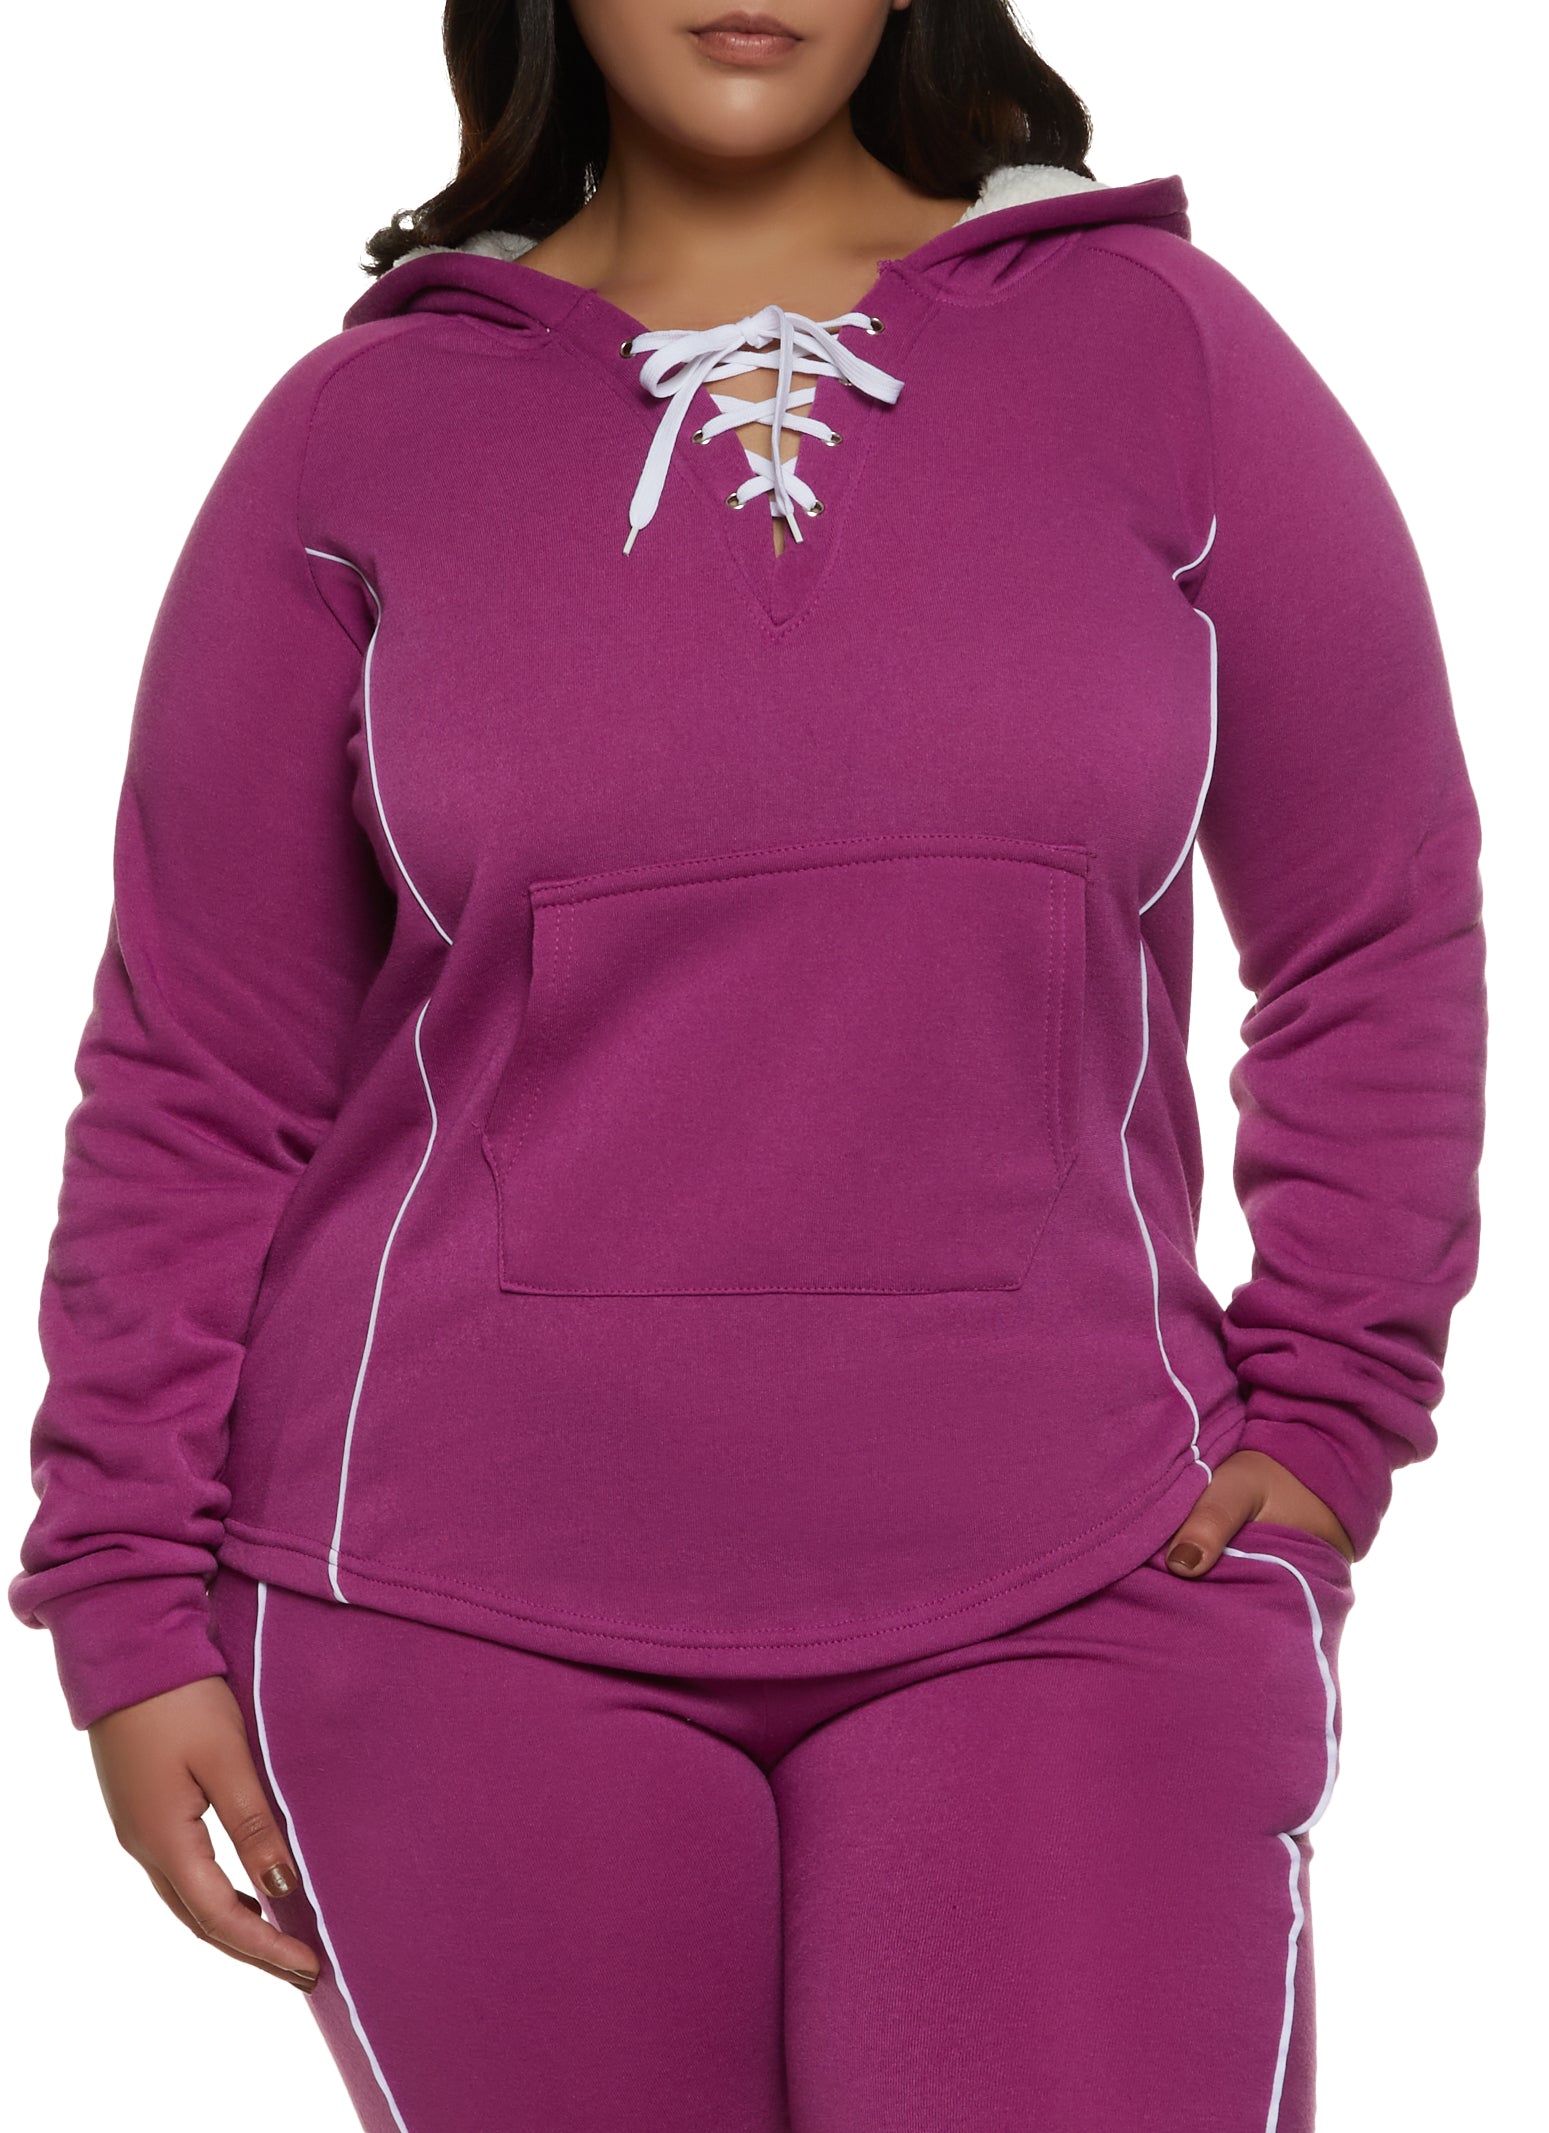 Plus Size Contrast Piping Hooded Lace Up Sweatshirt